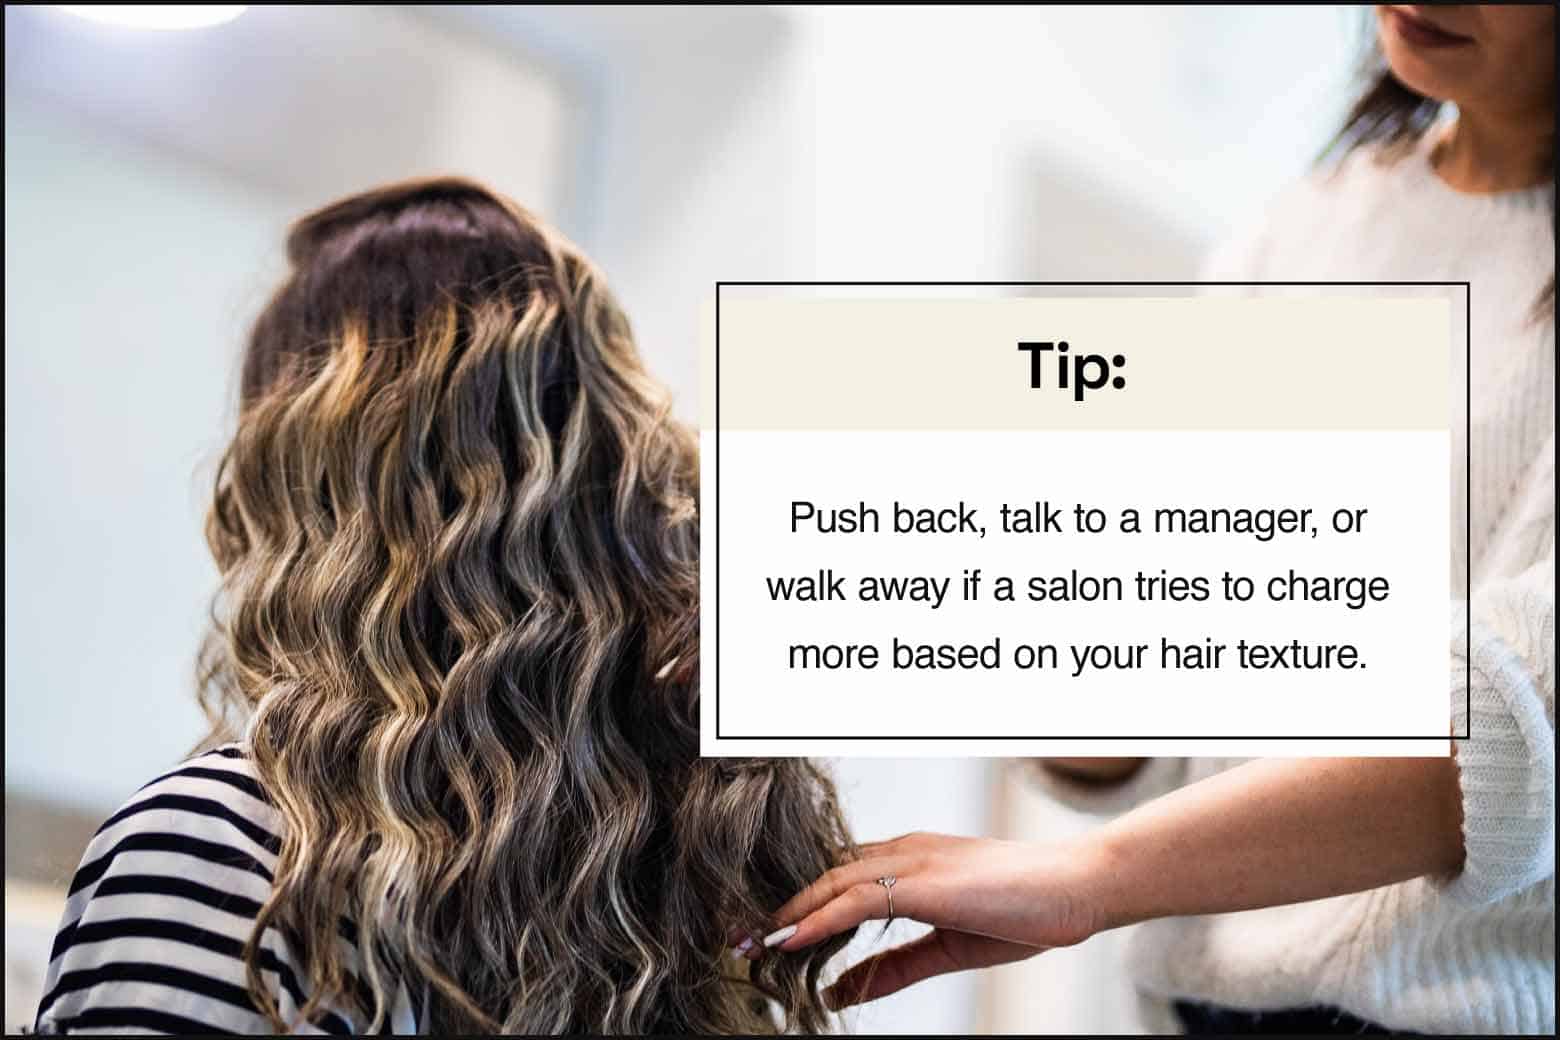 person with brown and blonde wavy hair getting a hair cut, graphic tip on the right explaining to push back, talk to a manager, or walk away if a salon tries to charge more based on your hair texture